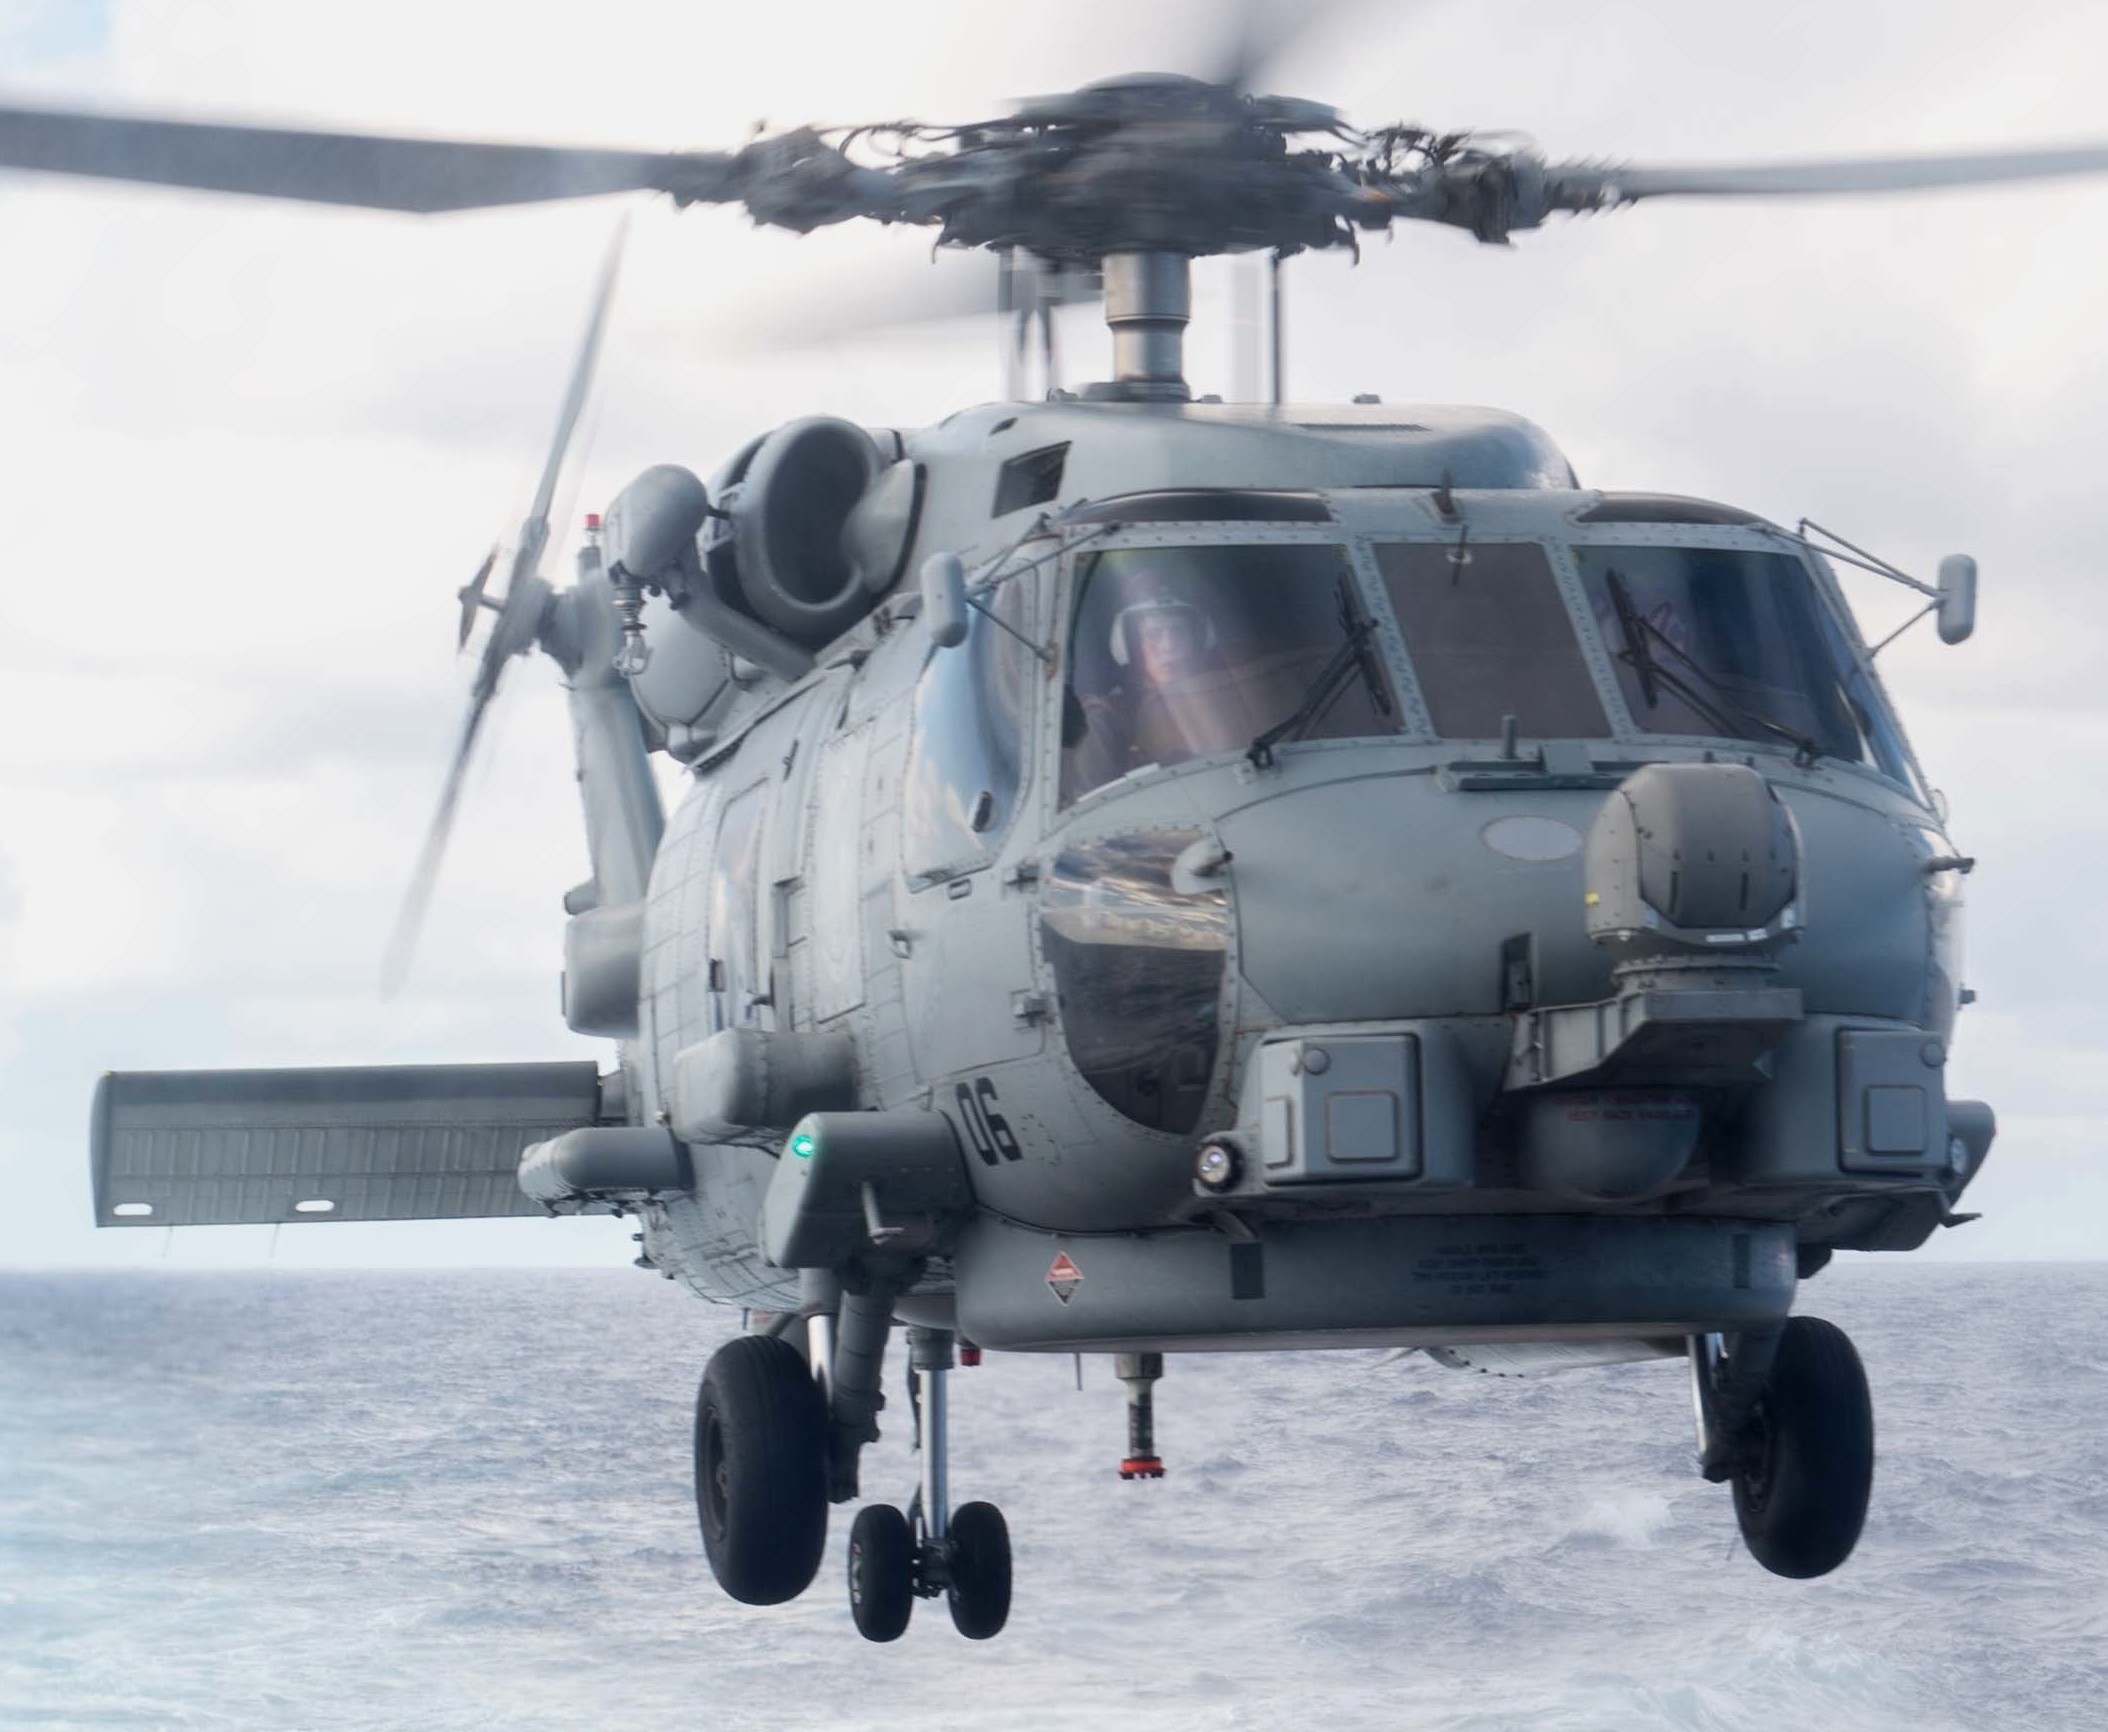 hsm-51 warlords helicopter maritime strike squadron mh-60r seahawk navy 2016 38